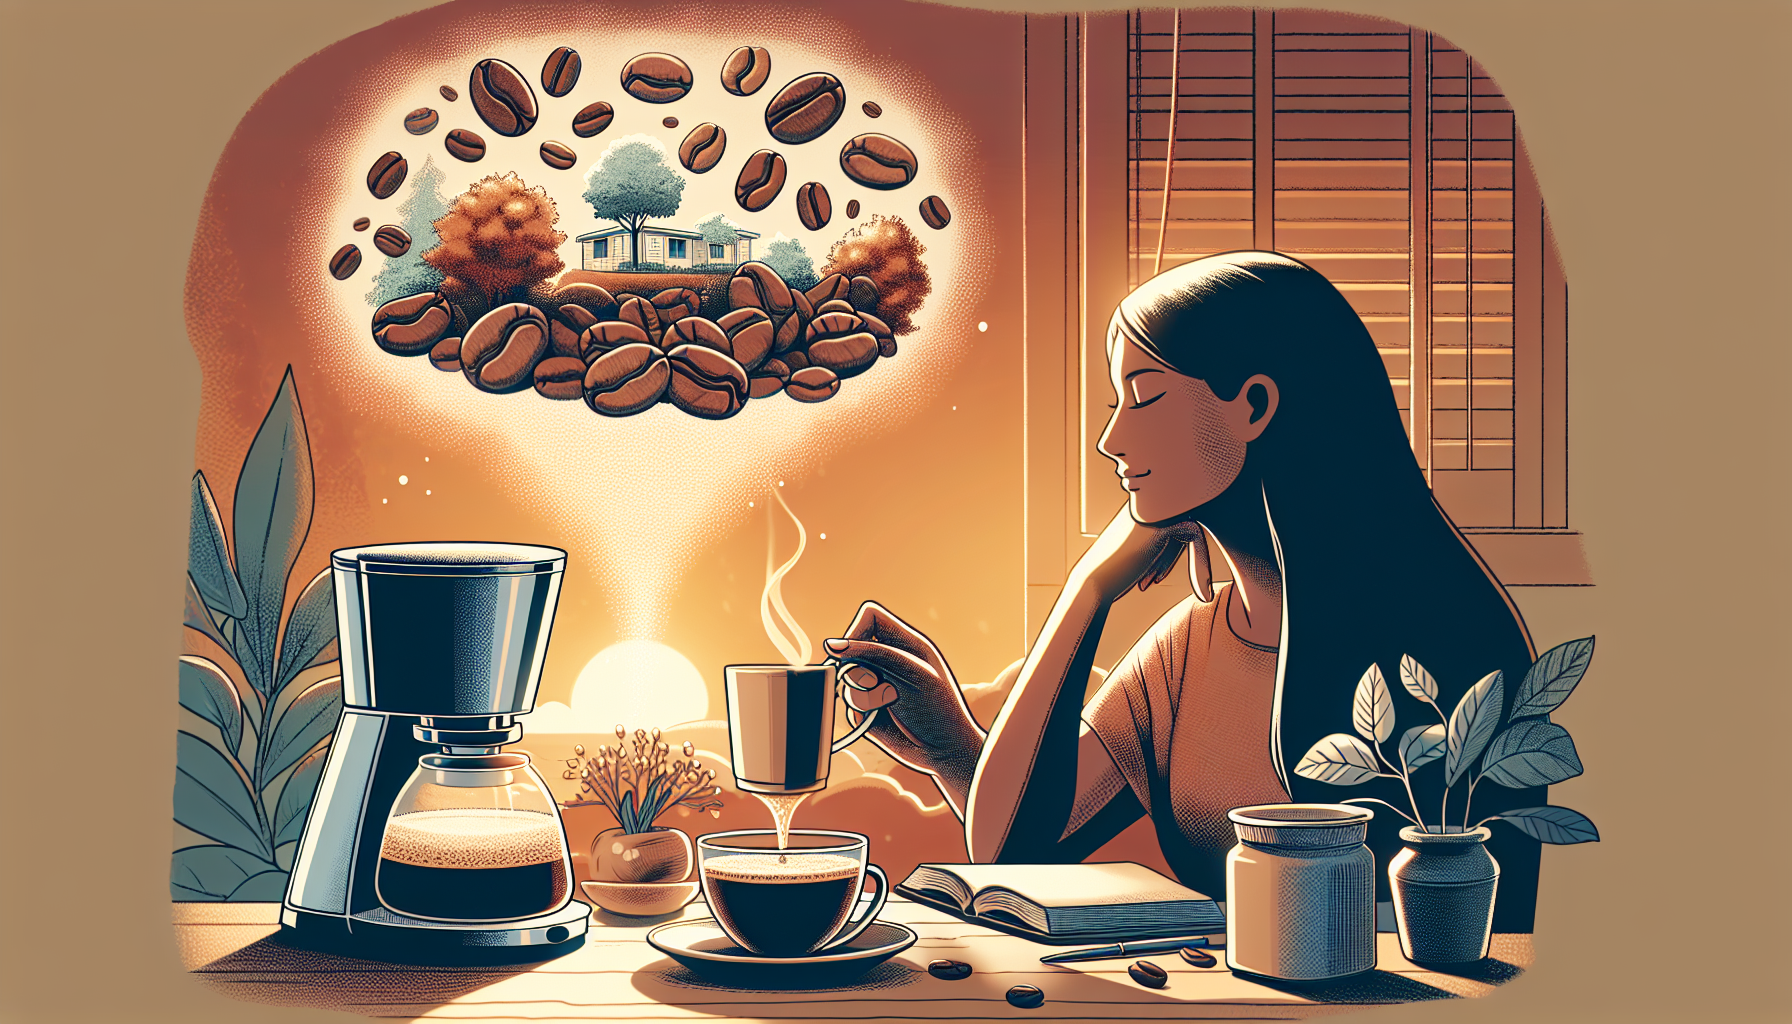 Visualize a peaceful scene that involves the process of making and enjoying a cup of no acid coffee. The picture could capture elements like coffee beans, a coffee maker, a serene ambiance with warm l